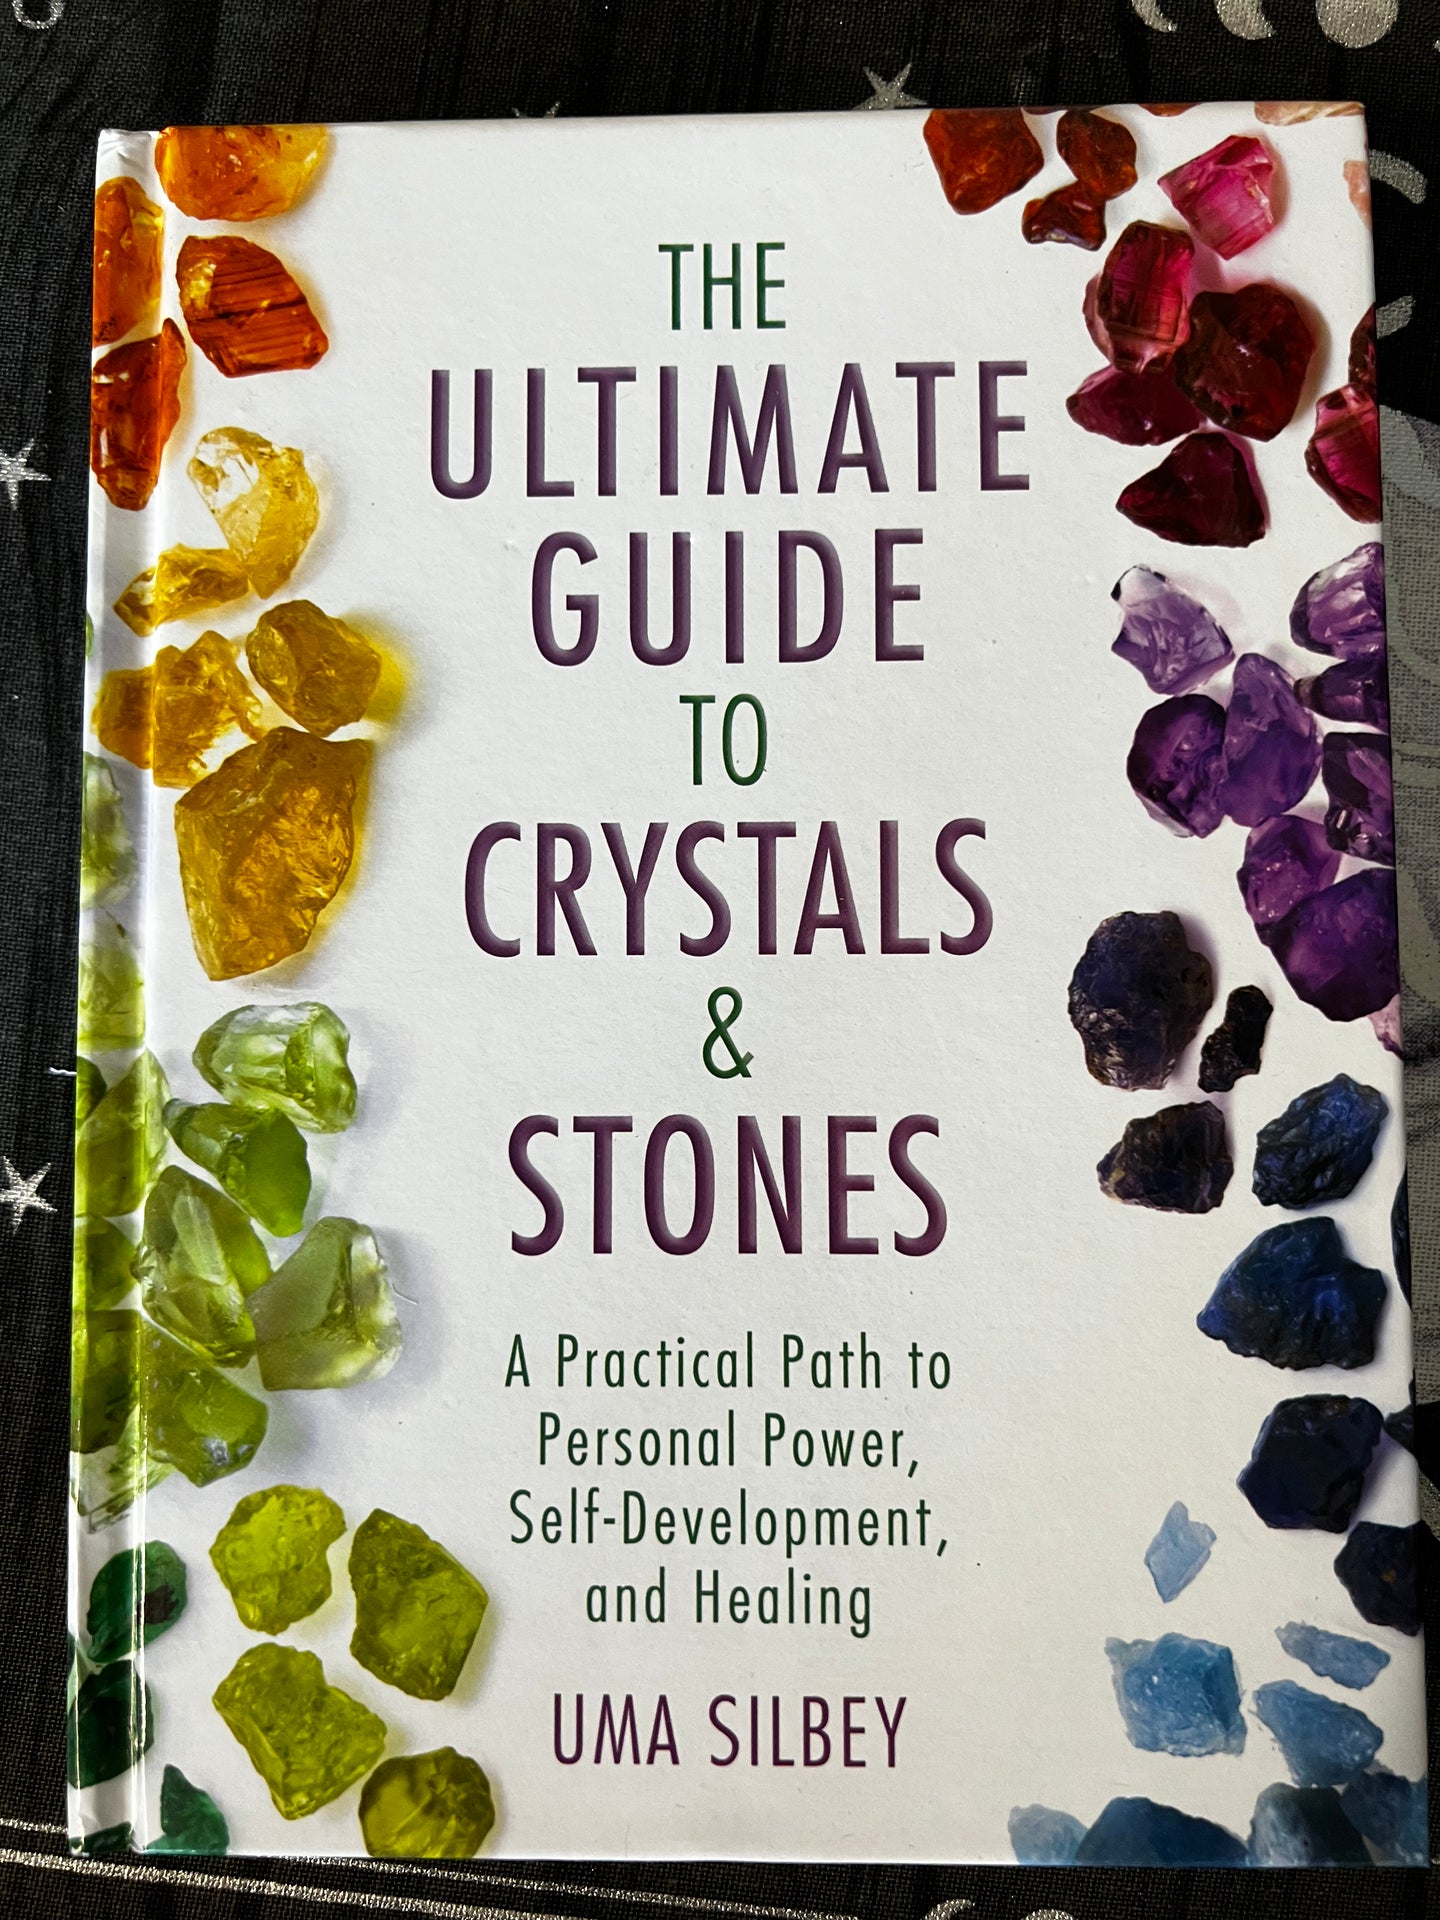 The Ultimate Guide to Crystals and Stones